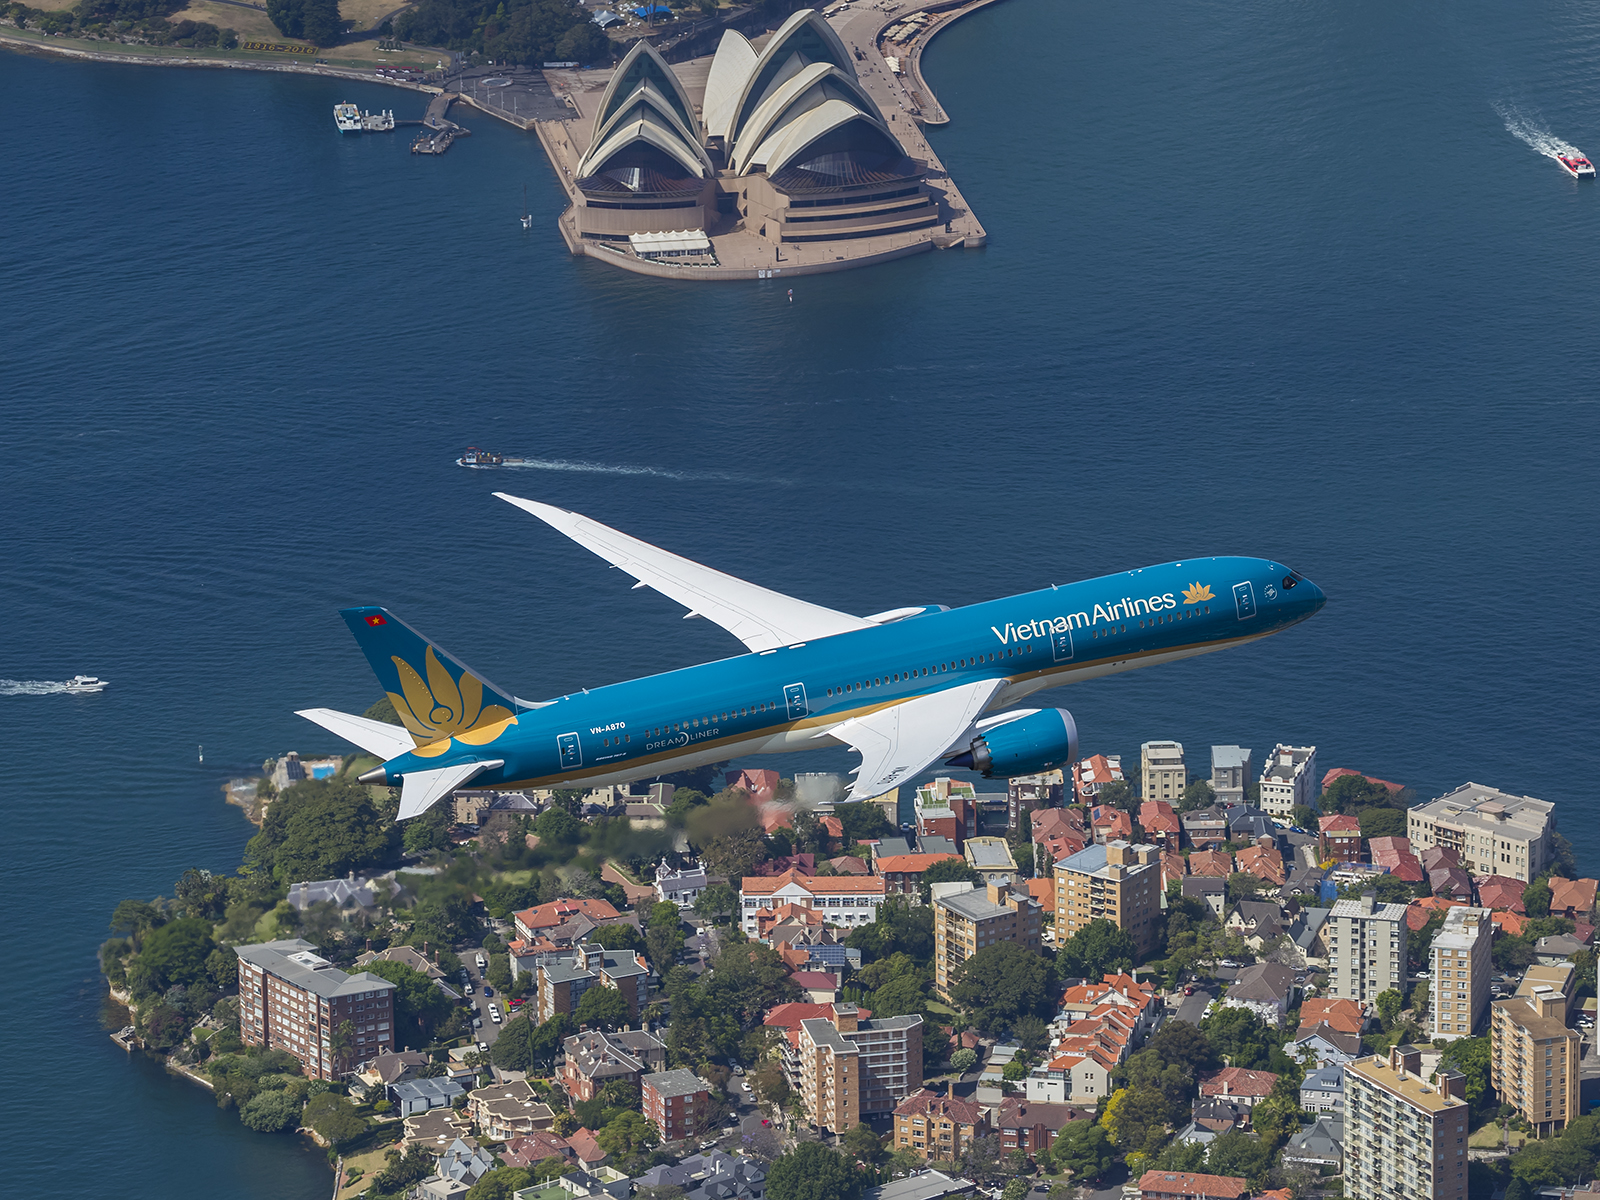 Vietnam Airlines marks 30 years of direct flights to Australia with a significant celebration